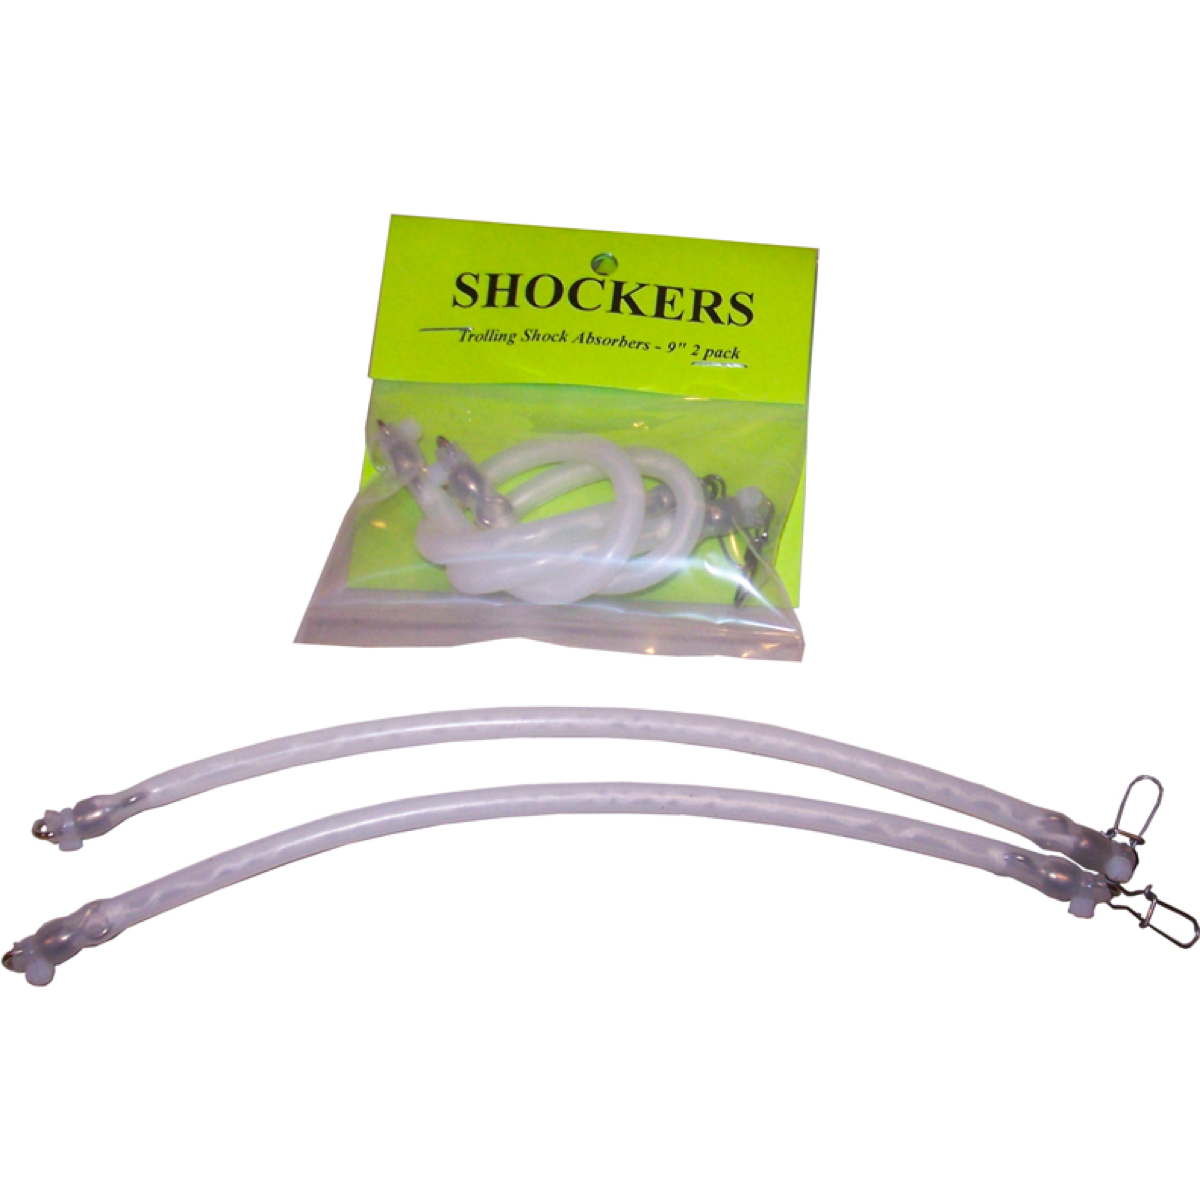 Photo of Kittrick Amish "Shockers" Snubbers for sale at United Tackle Shops.